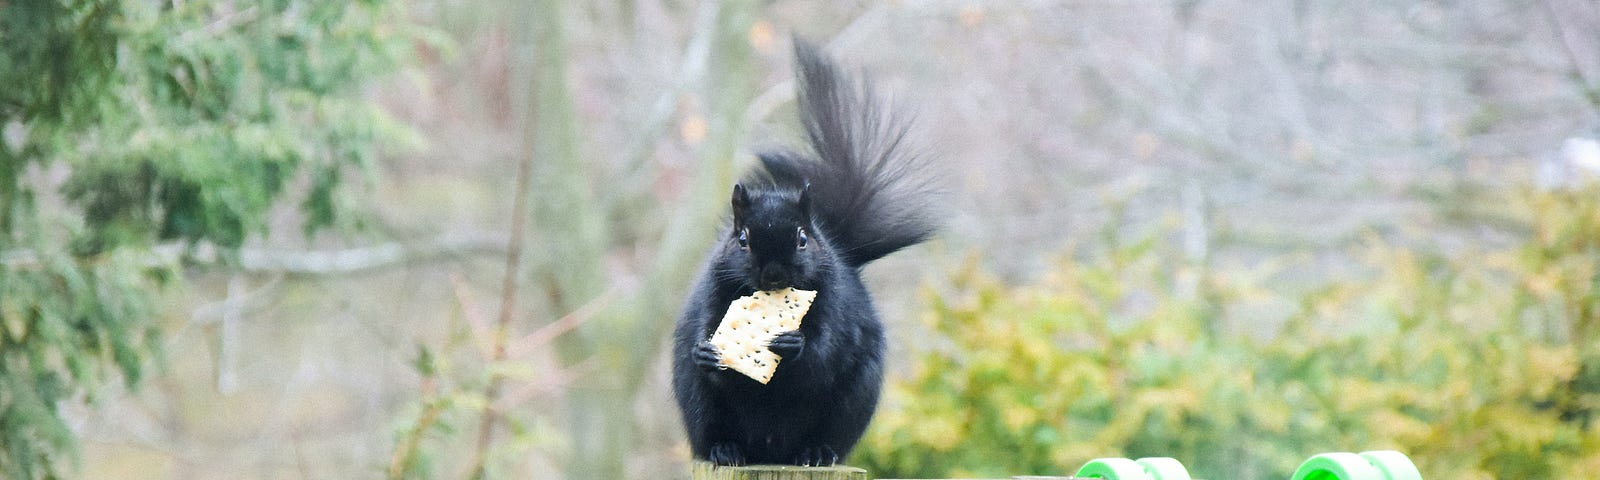 A black squirrel eating a cracker on a fence